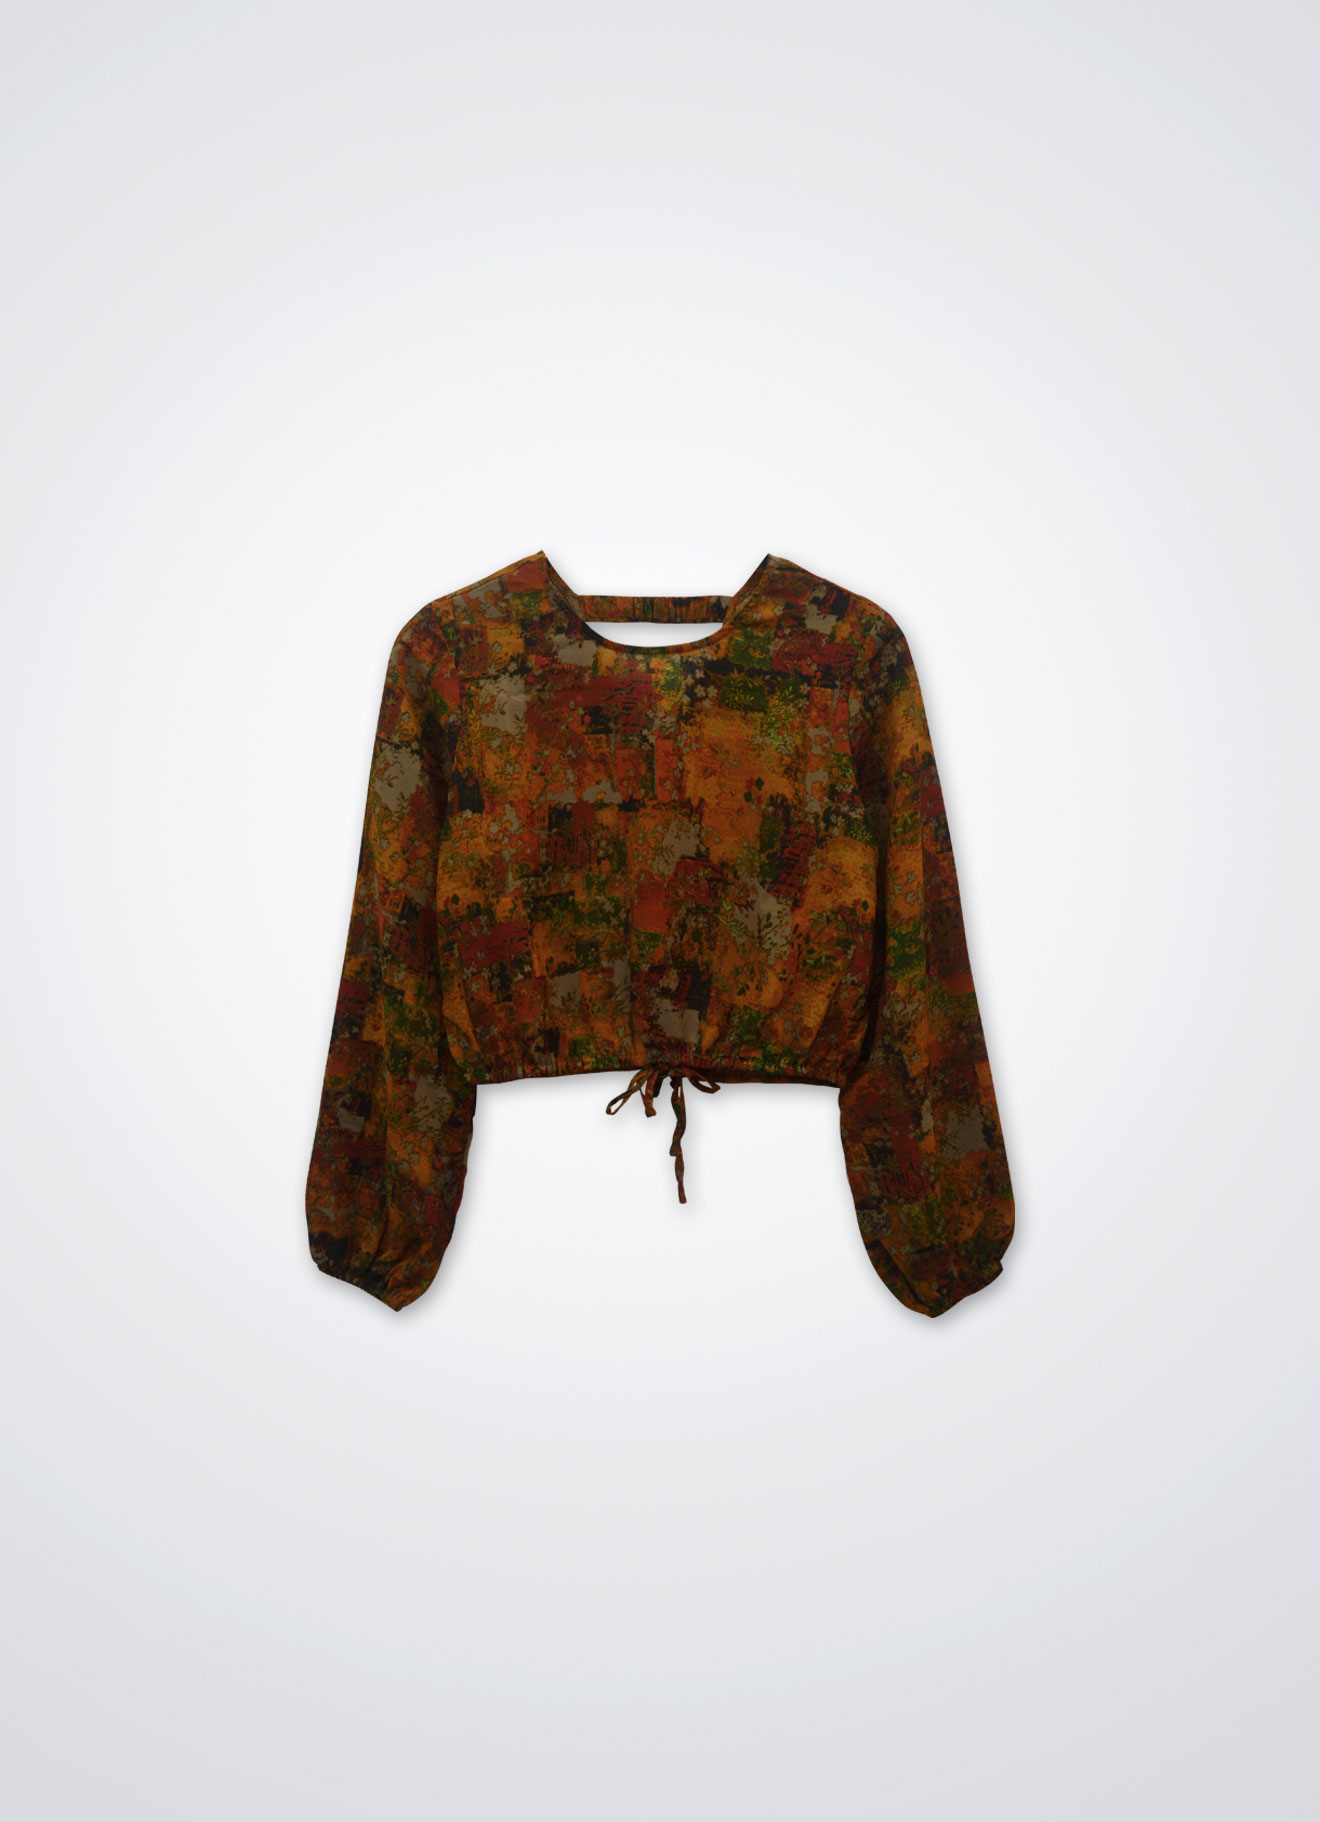 Apricot by Printed Blouse